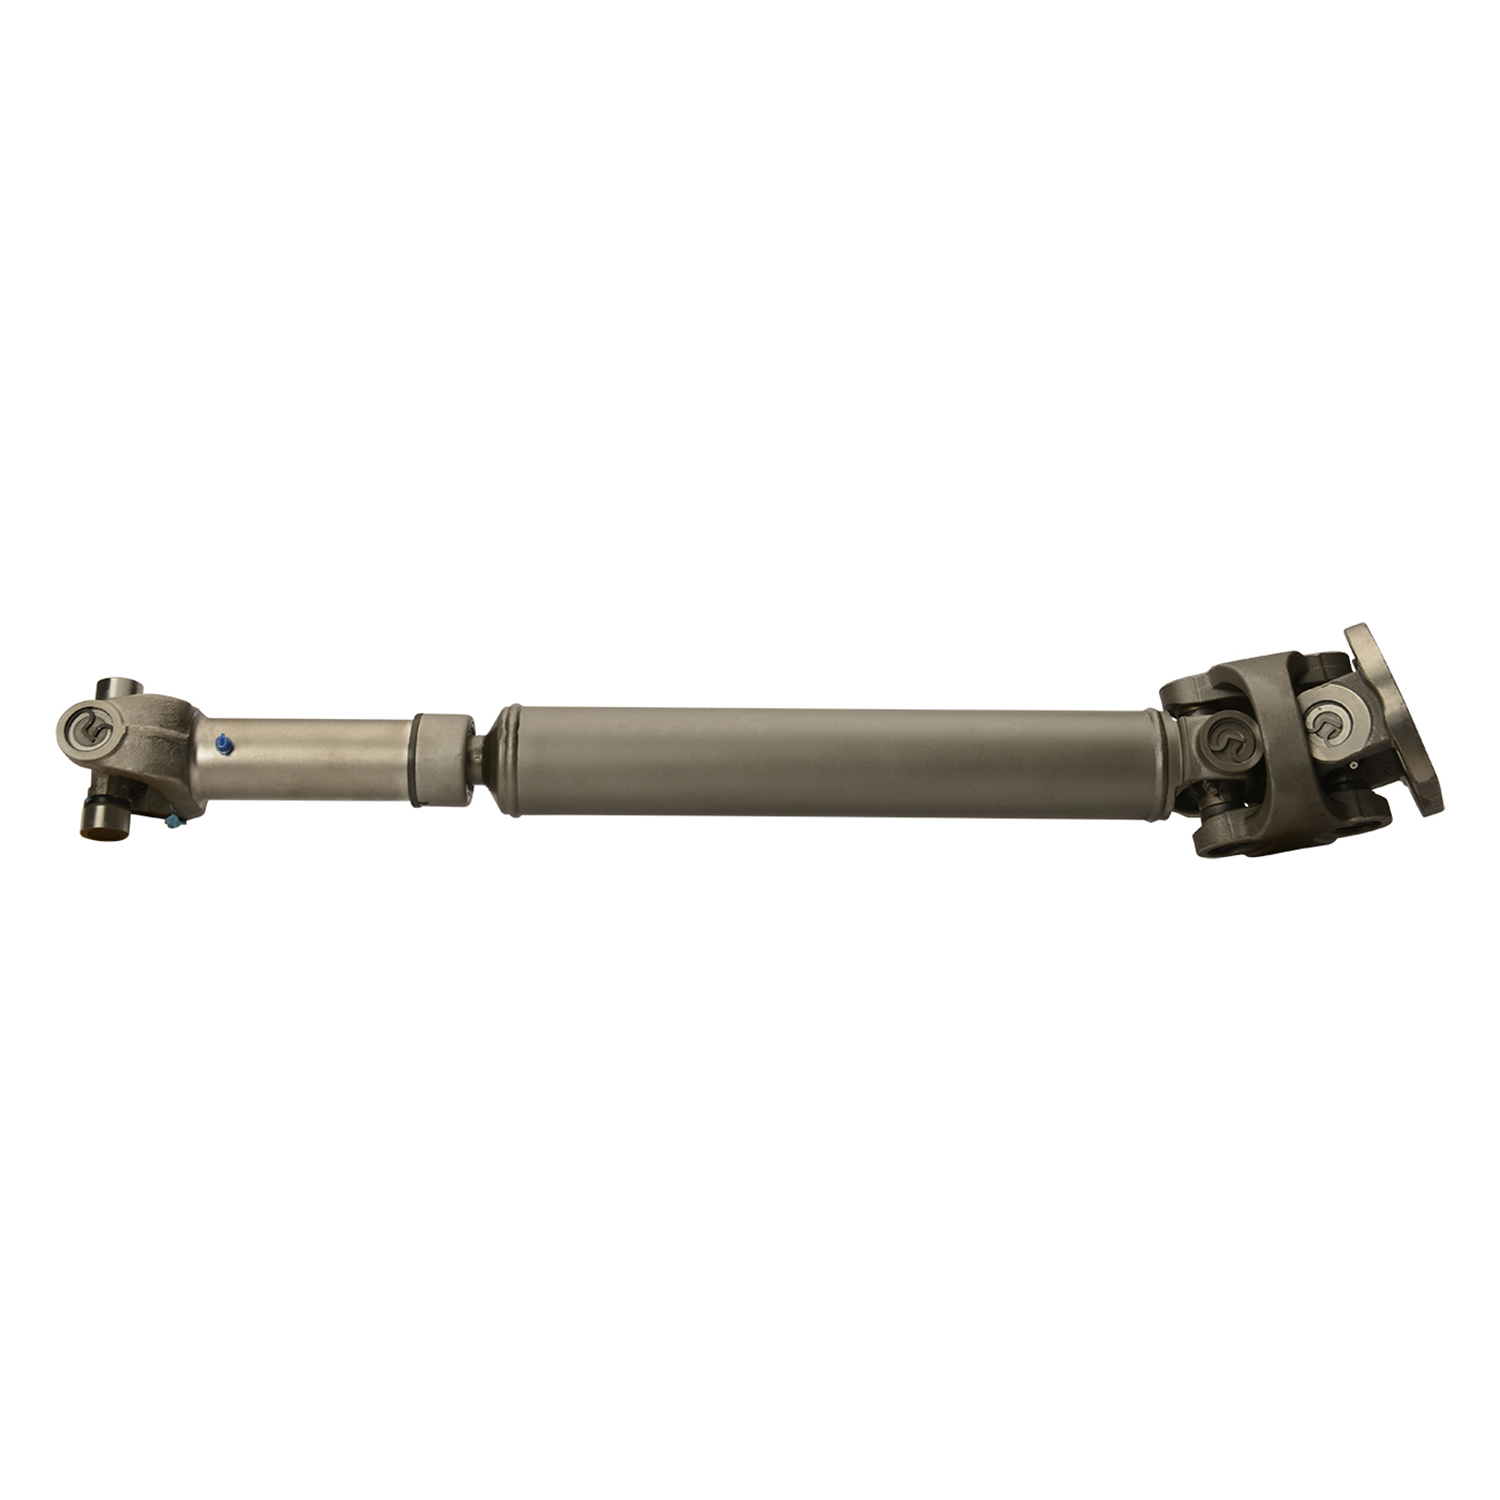 USA Standard ZDS9303 Front Driveshaft, Excursion/F-Series Trucks, 39.5 in. Center-To-Center